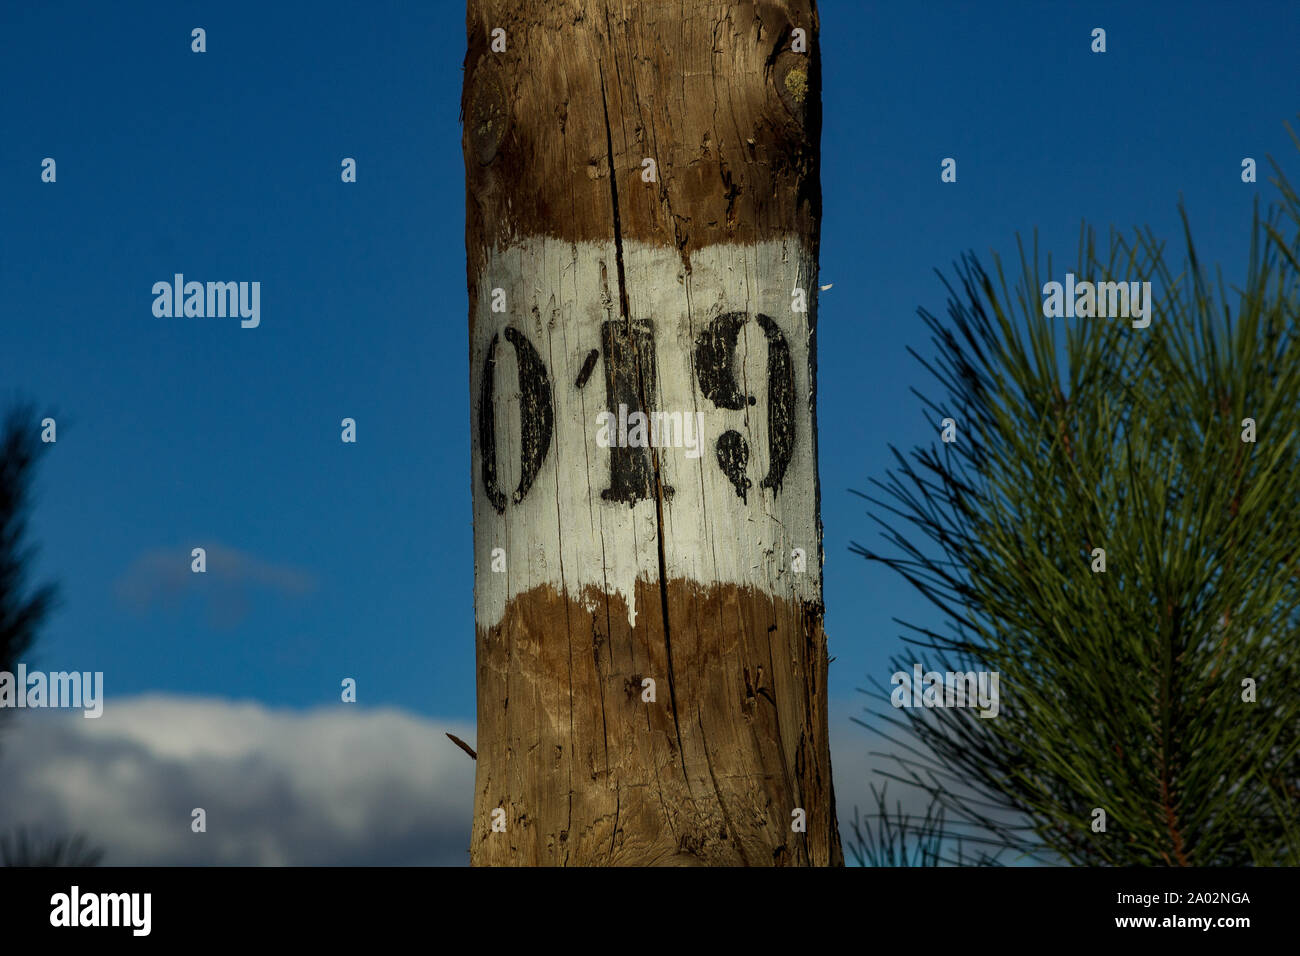 Wooden telegraph pole 019 in Portugal Stock Photo